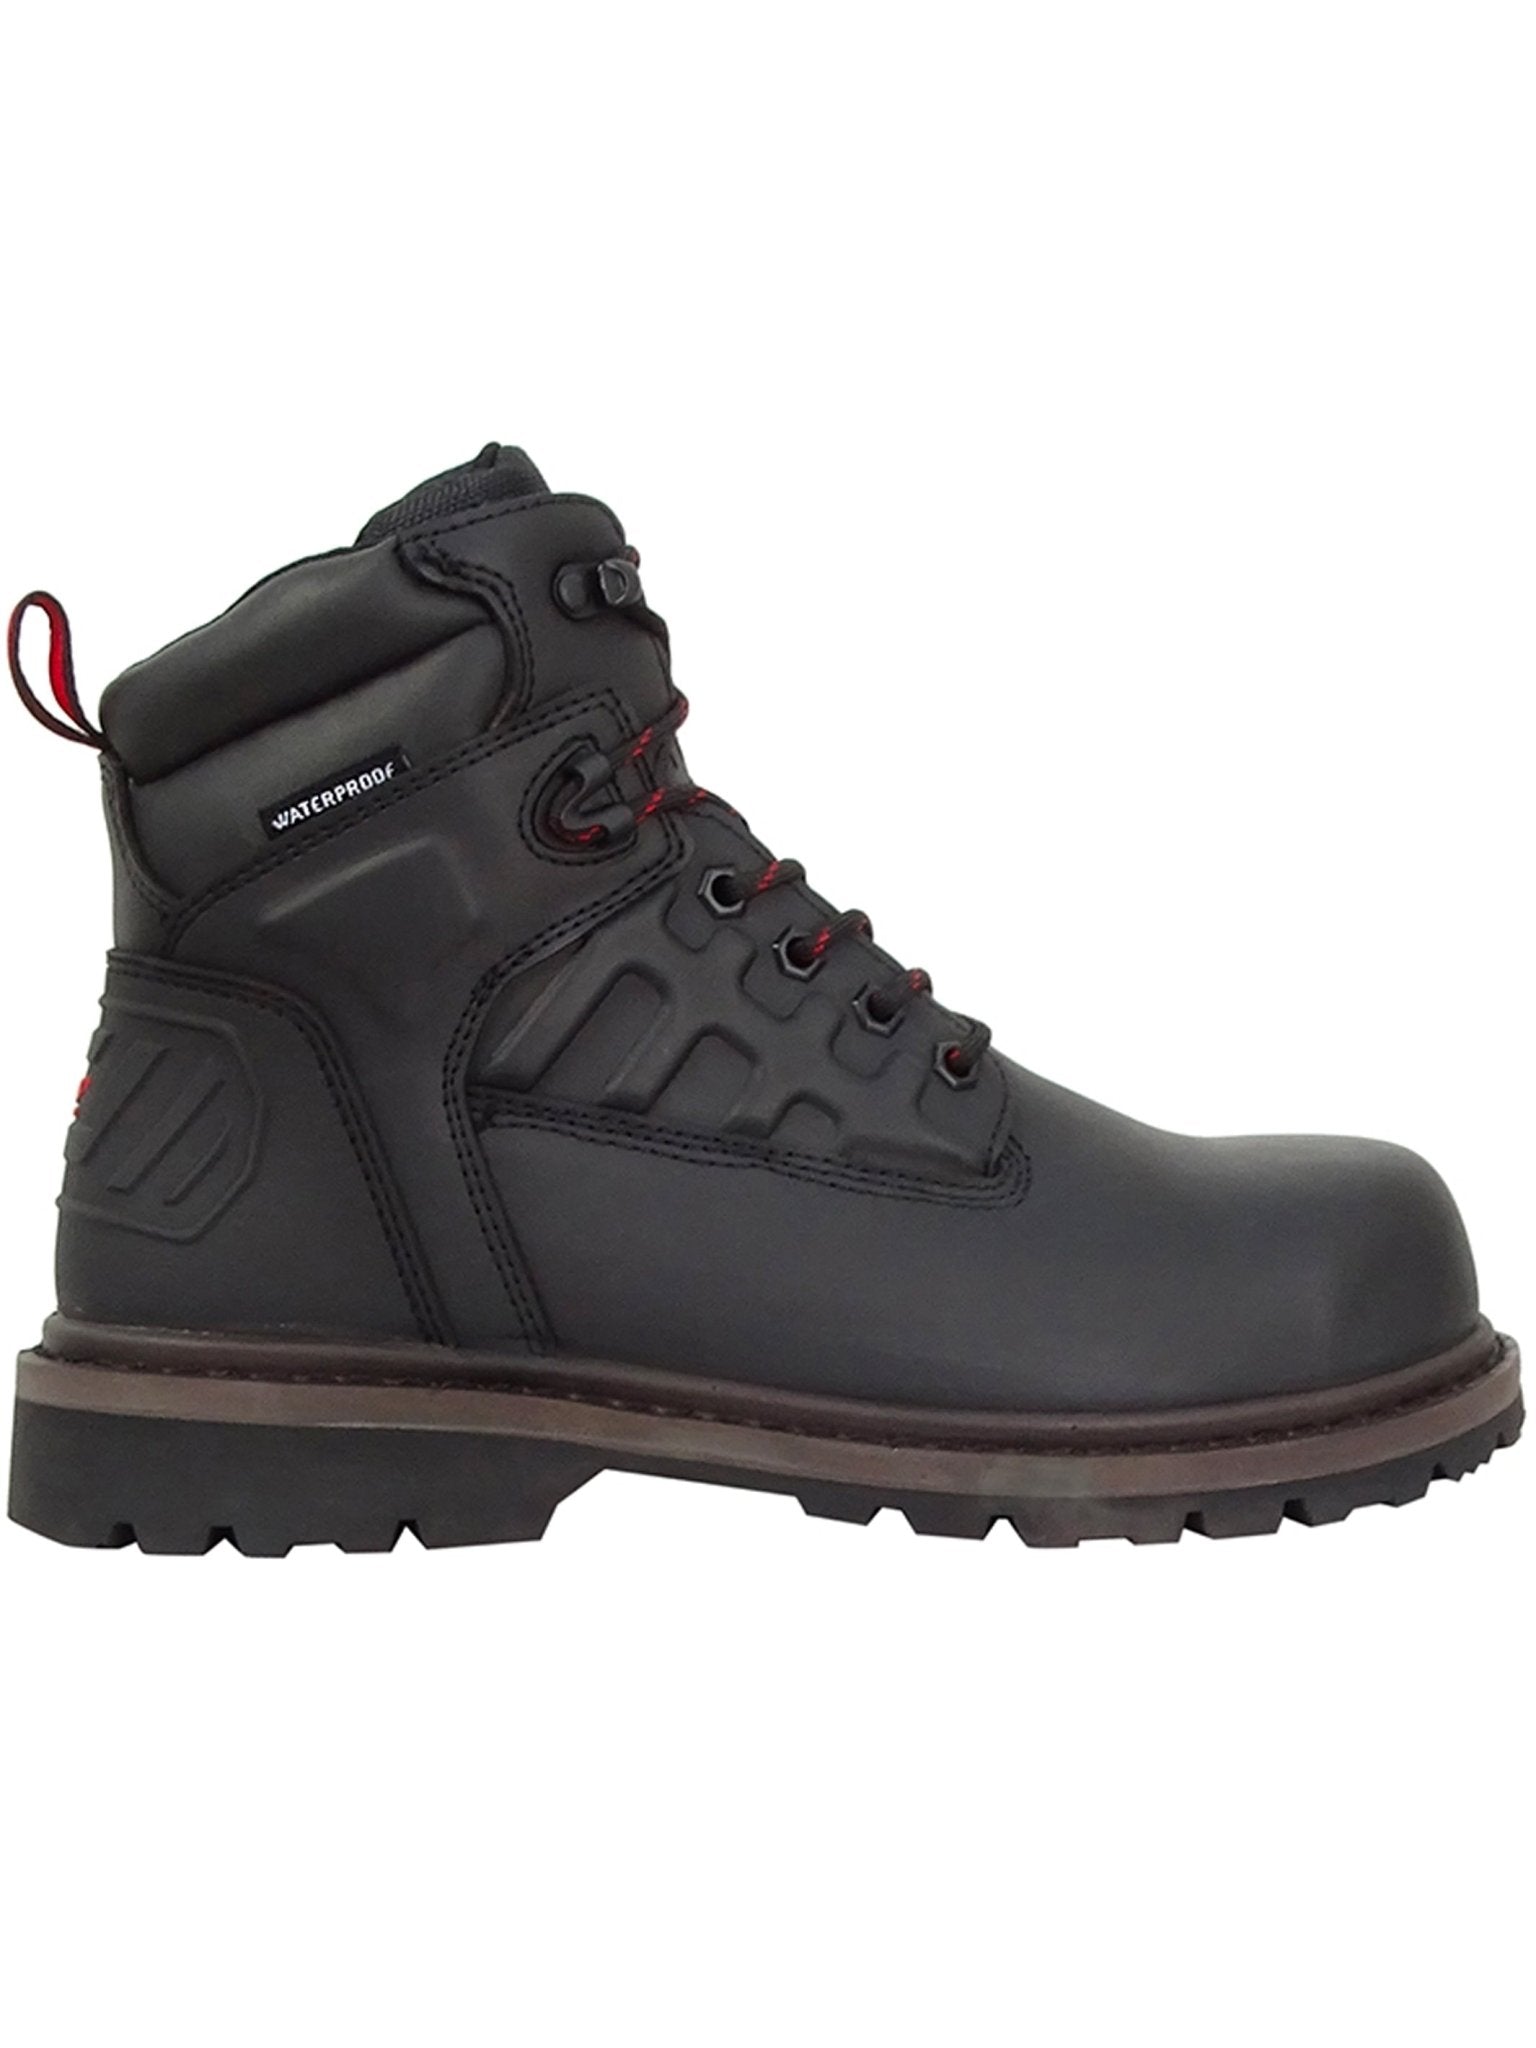 4elementsclothingHoggs of FifeHoggs of Fife - Hercules Safety Lace up Boots - Steel Toe Cap bootsSafety FootwearHERC/BK/40